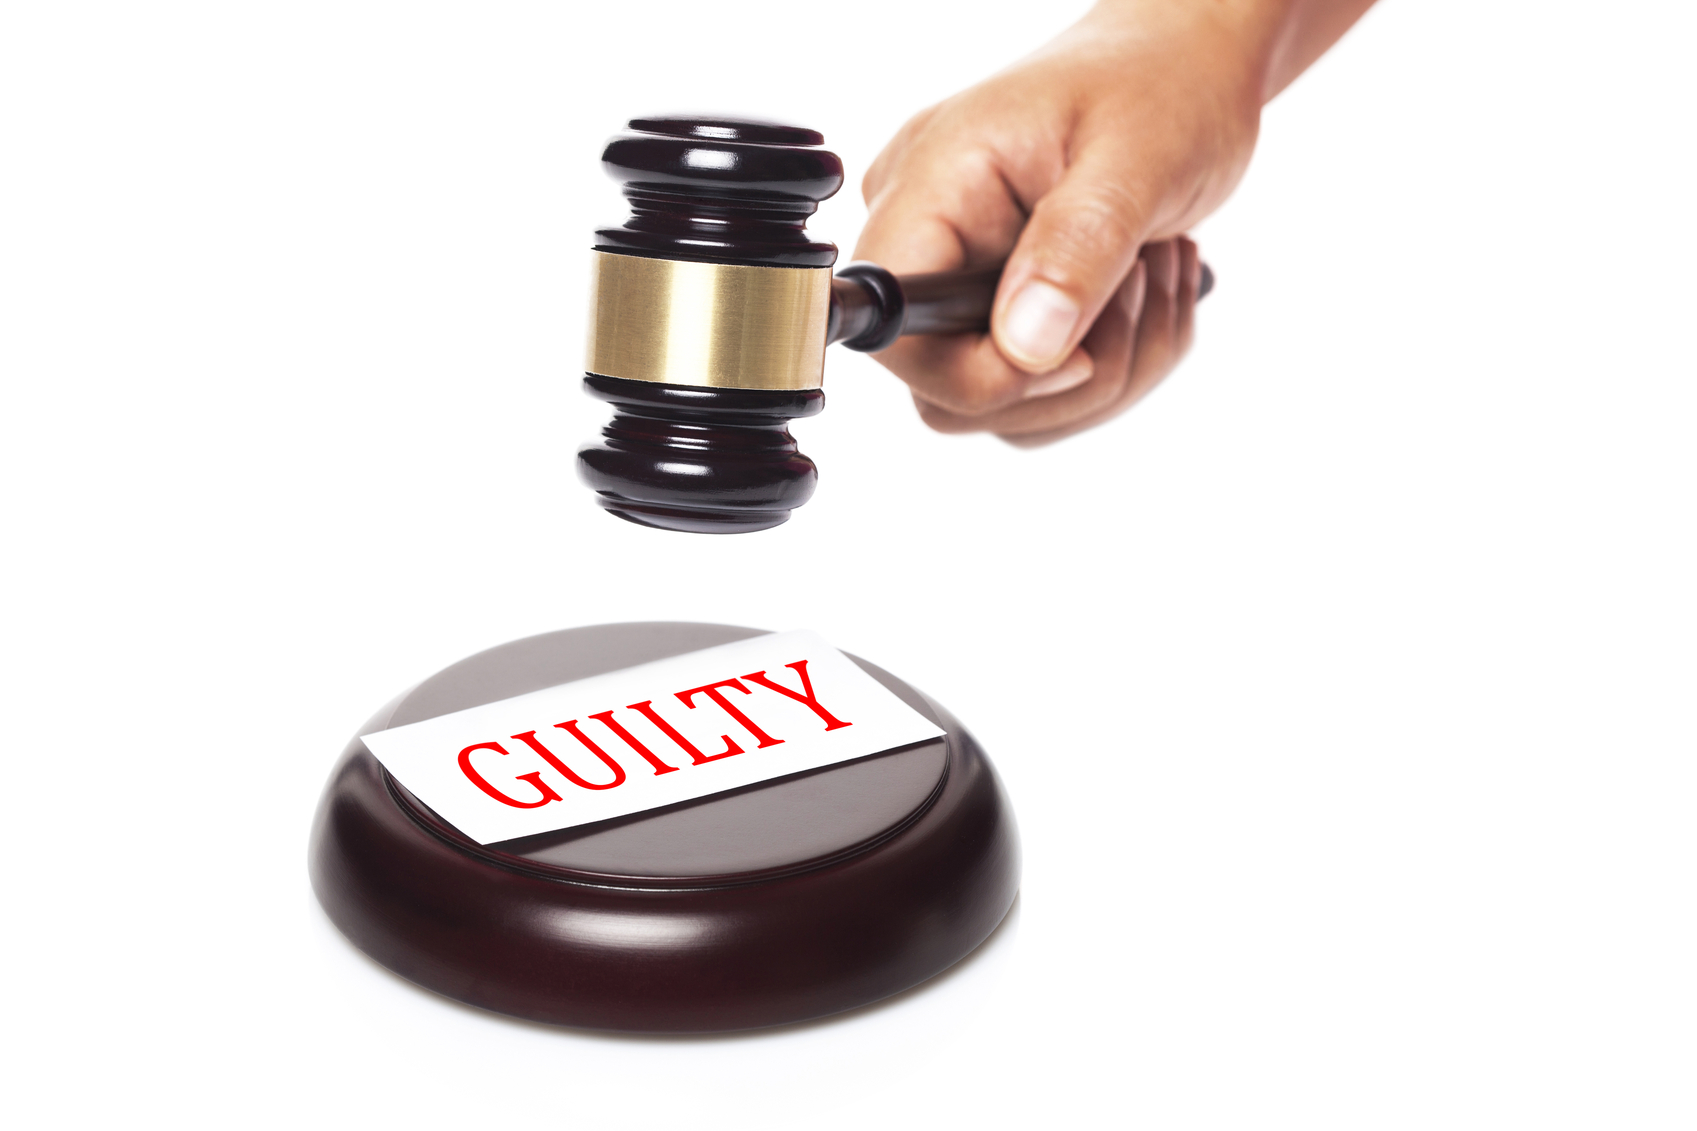 Family Caregivers in California. The Court Finds You Guilty…